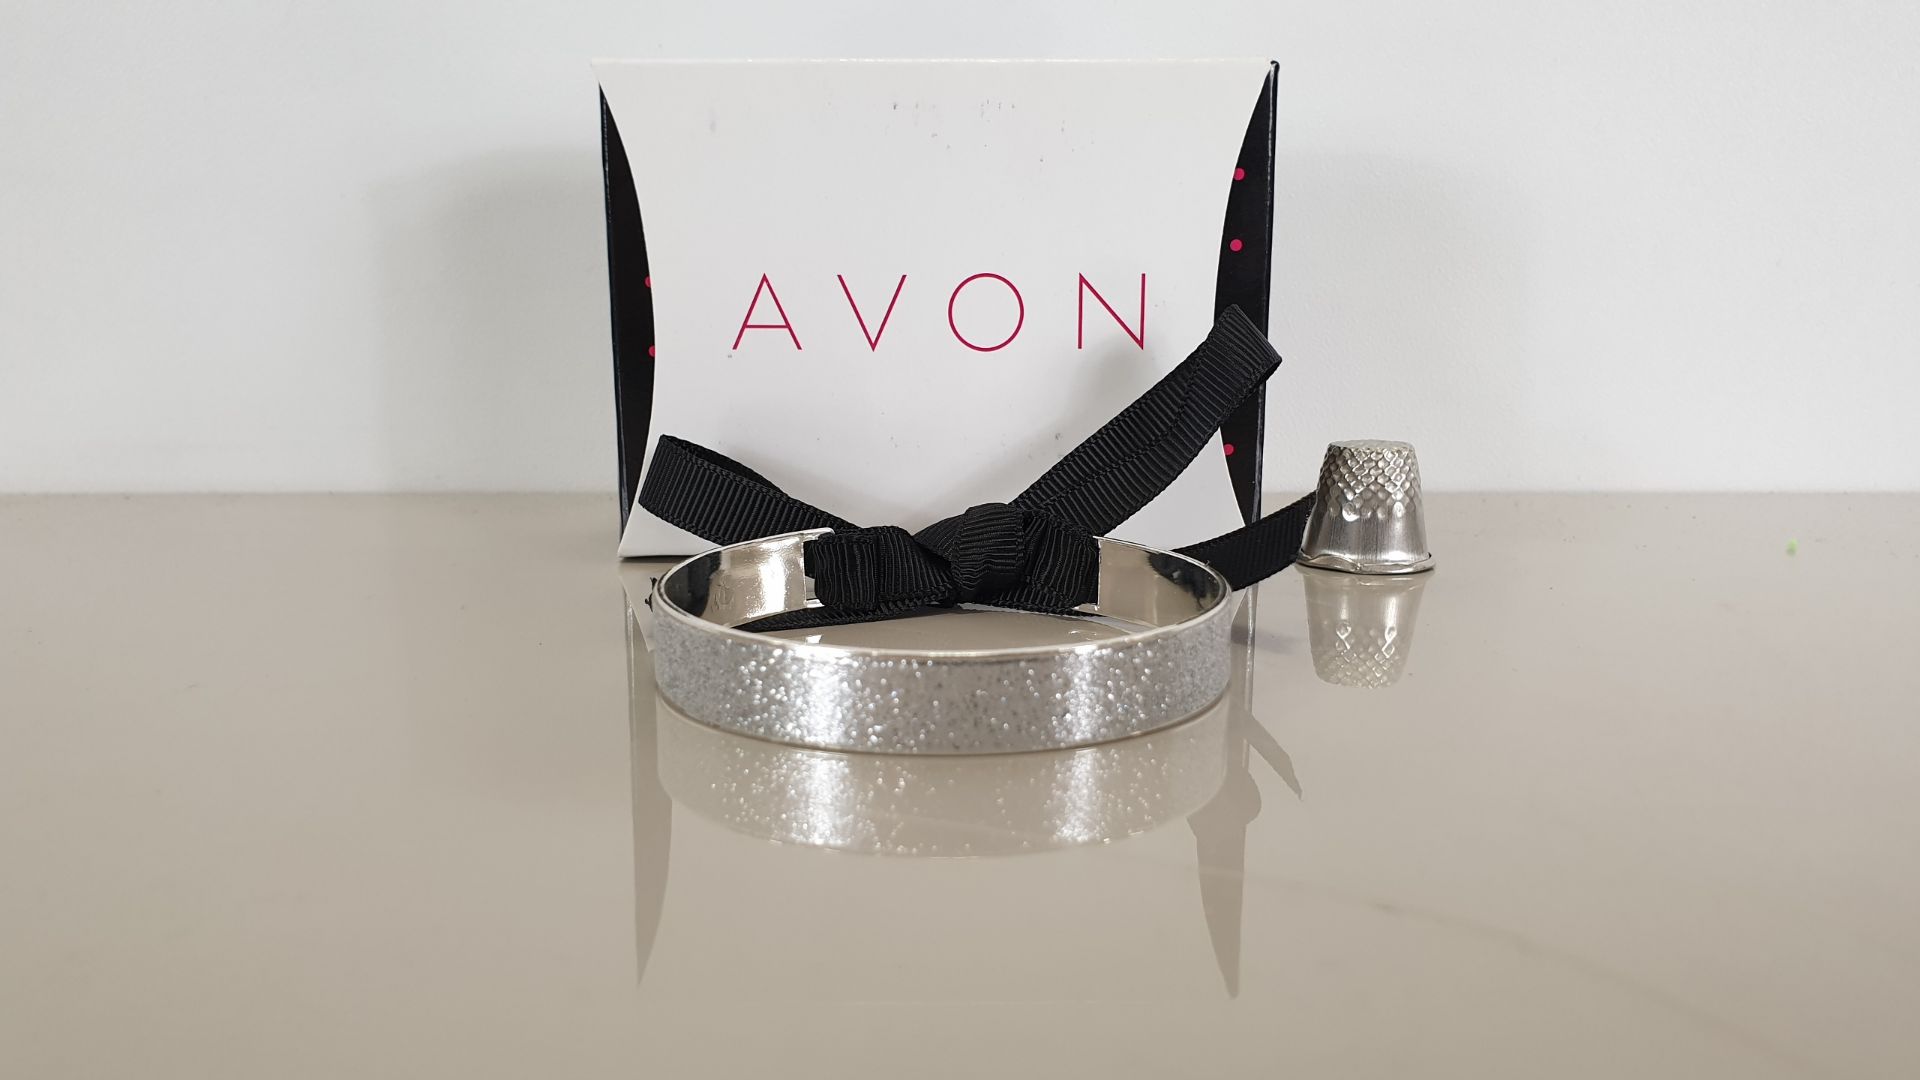 (LOT FOR THURSDAY 28TH MAY AUCTION) 132 X BRAND NEW AVON GIGI GLITTER BANGLE IN SILVER IN 1 BOX